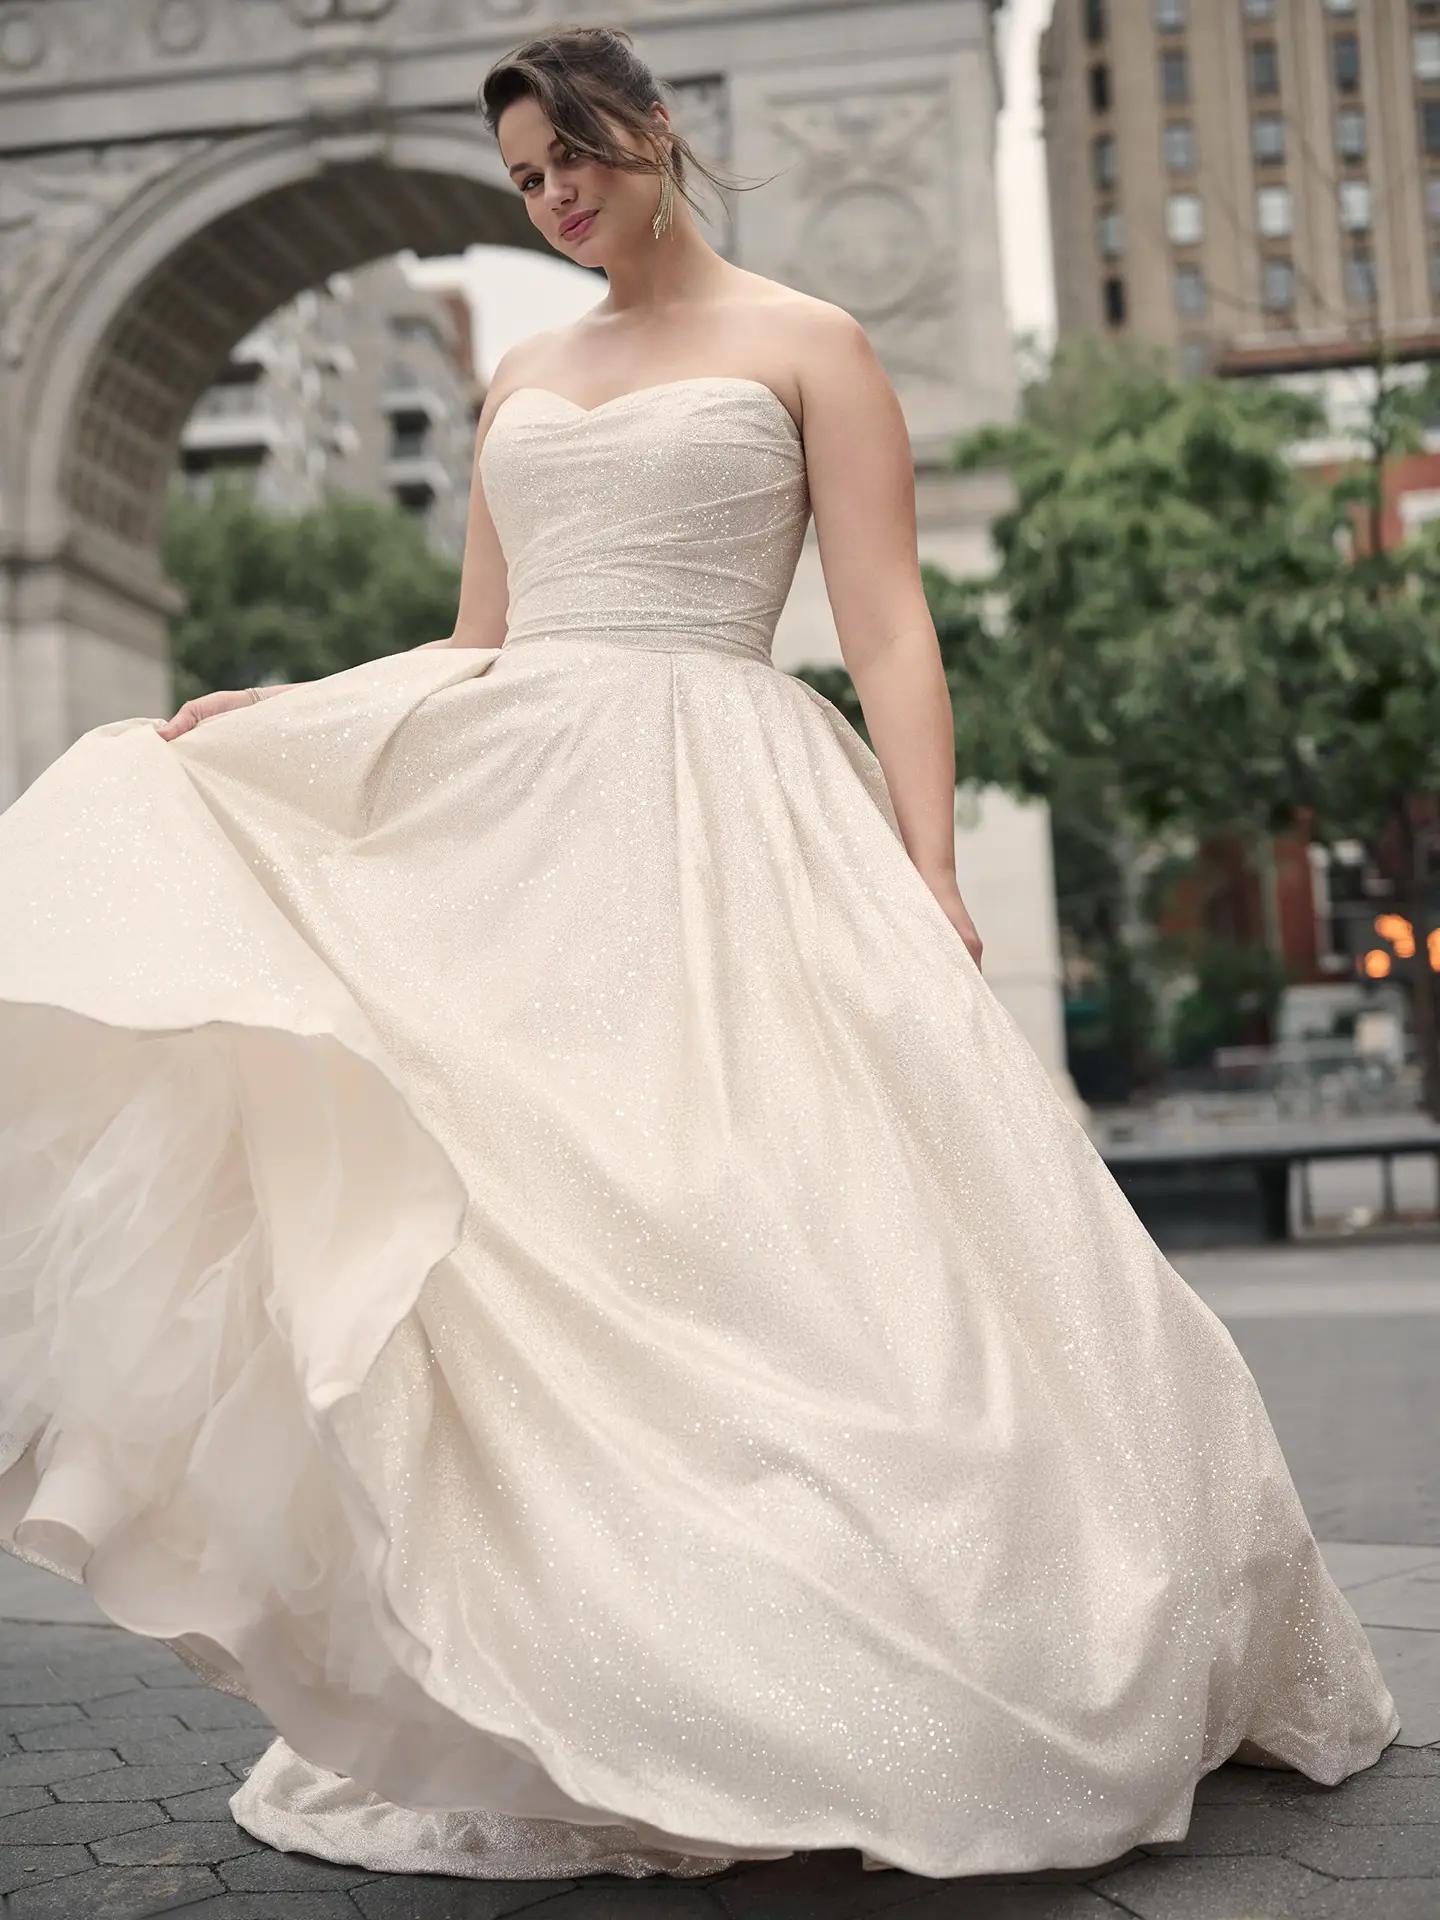 Perfect Wedding Gowns for a Spring Wedding Image